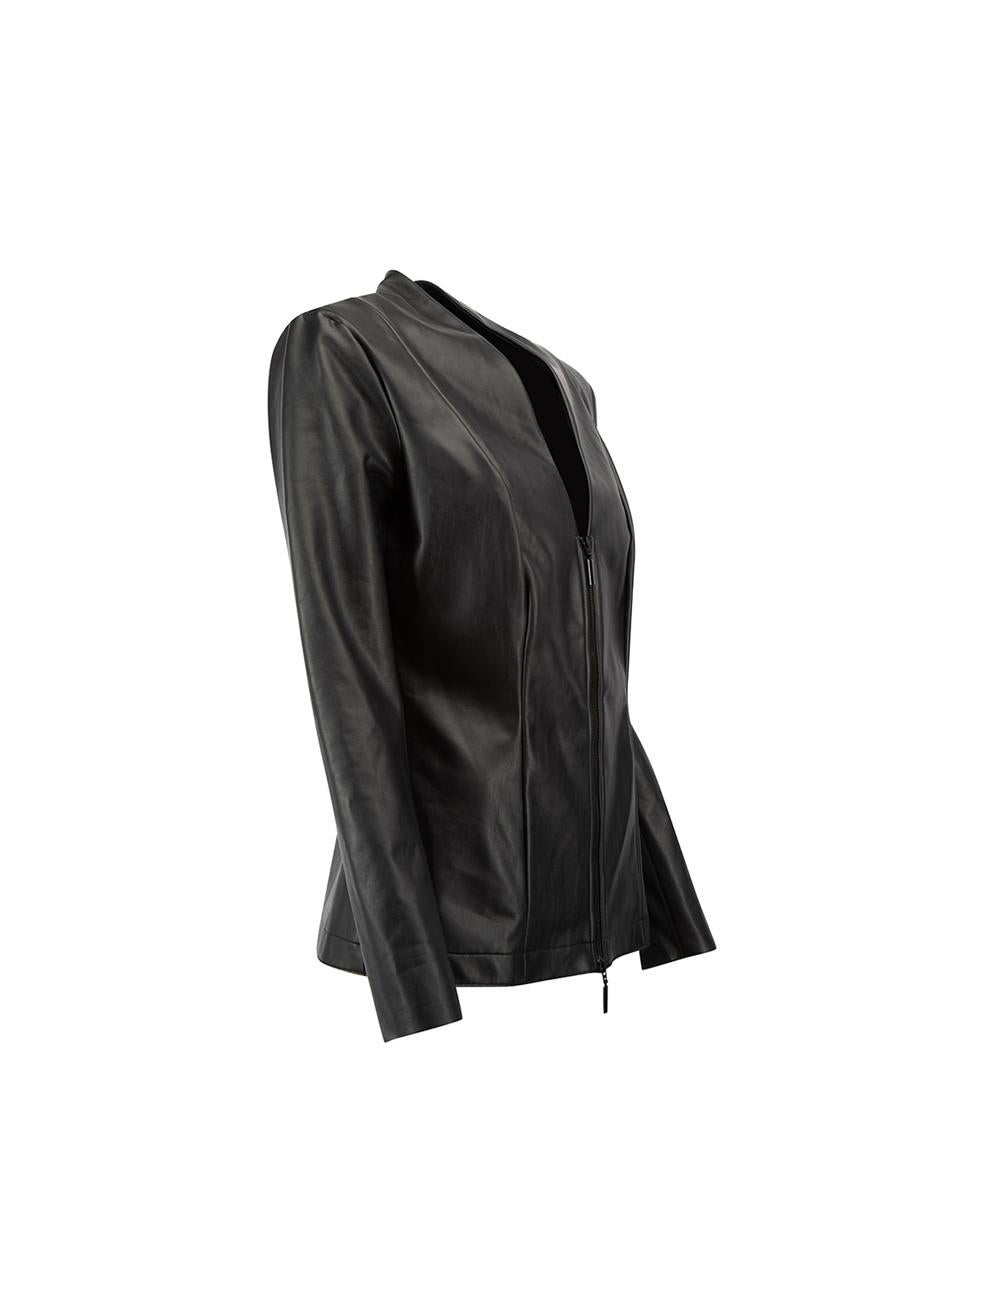 CONDITION is Very good. Hardly any visible wear to jacket is evident on this used Wolford designer resale item.



Details


Black

Faux leather

Long sleeves jacket

Front double zip closure

Sheer panel on sleeves





Composition

54%